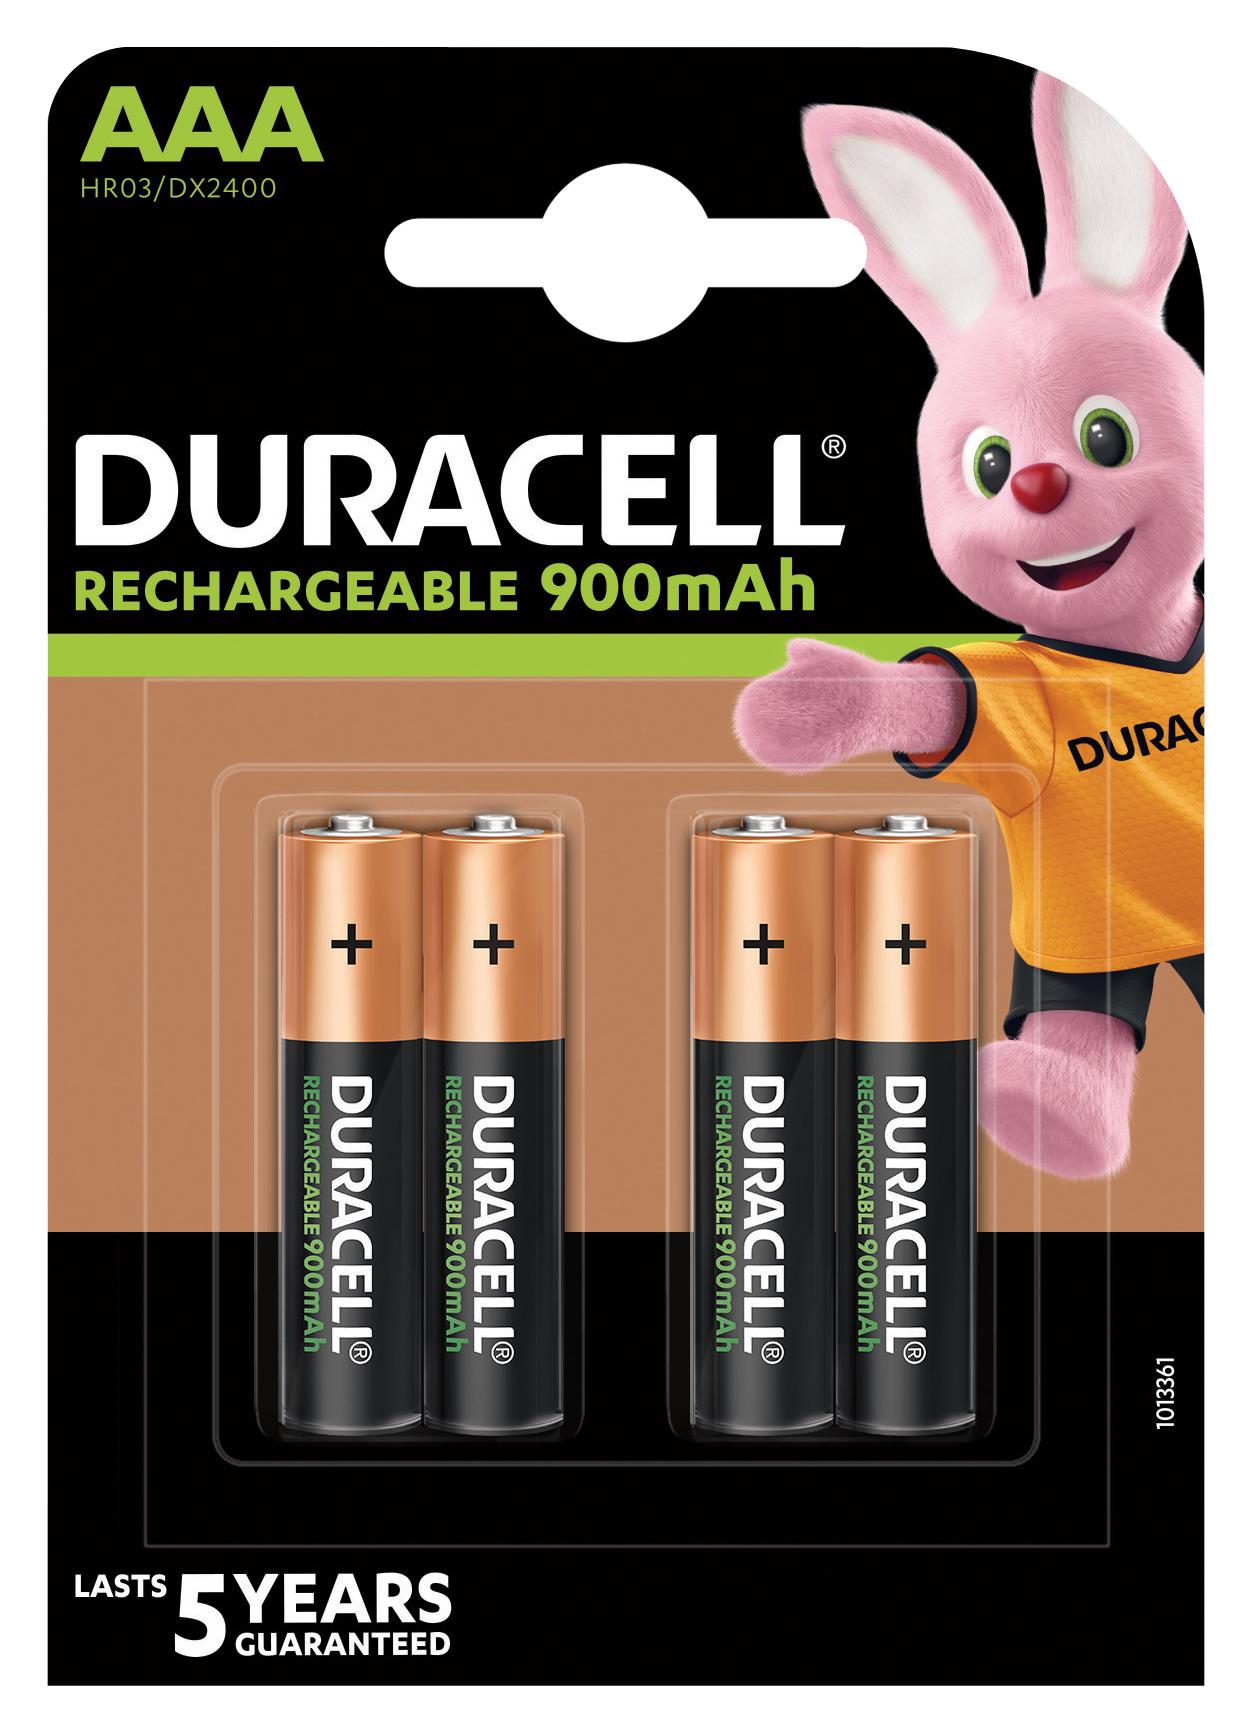 Duracell Dx2400 P4 Du Pre Battery, Rechargeable, 1.2V, 900Mah, Aaa